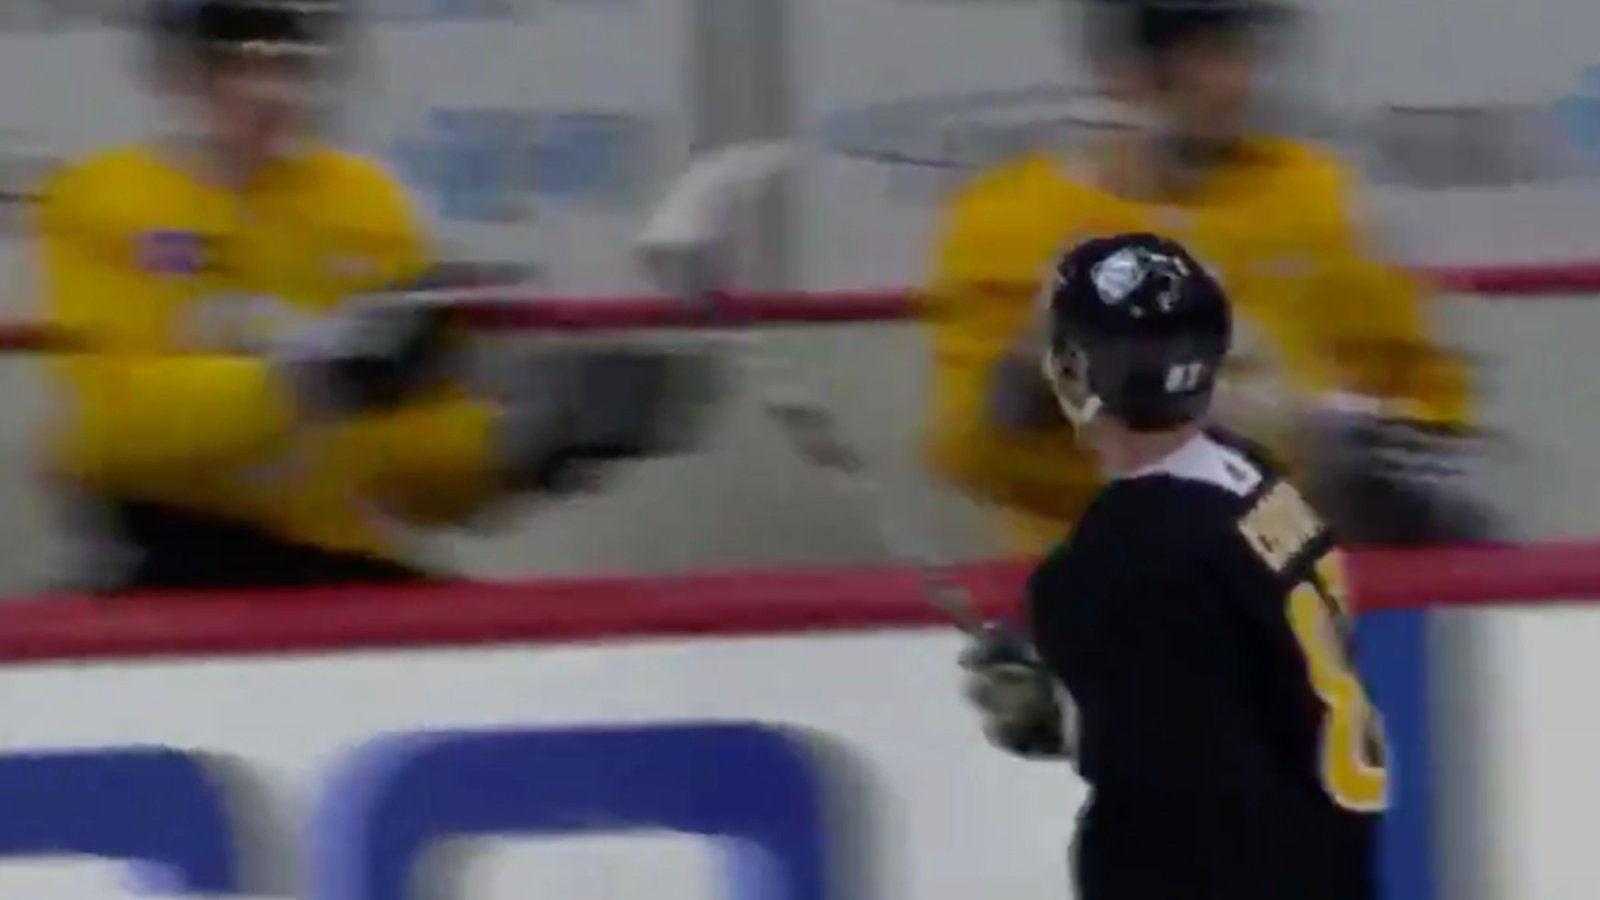 Sidney Crosby steals opponent’s stick and scores unbelievable goal after breaking his